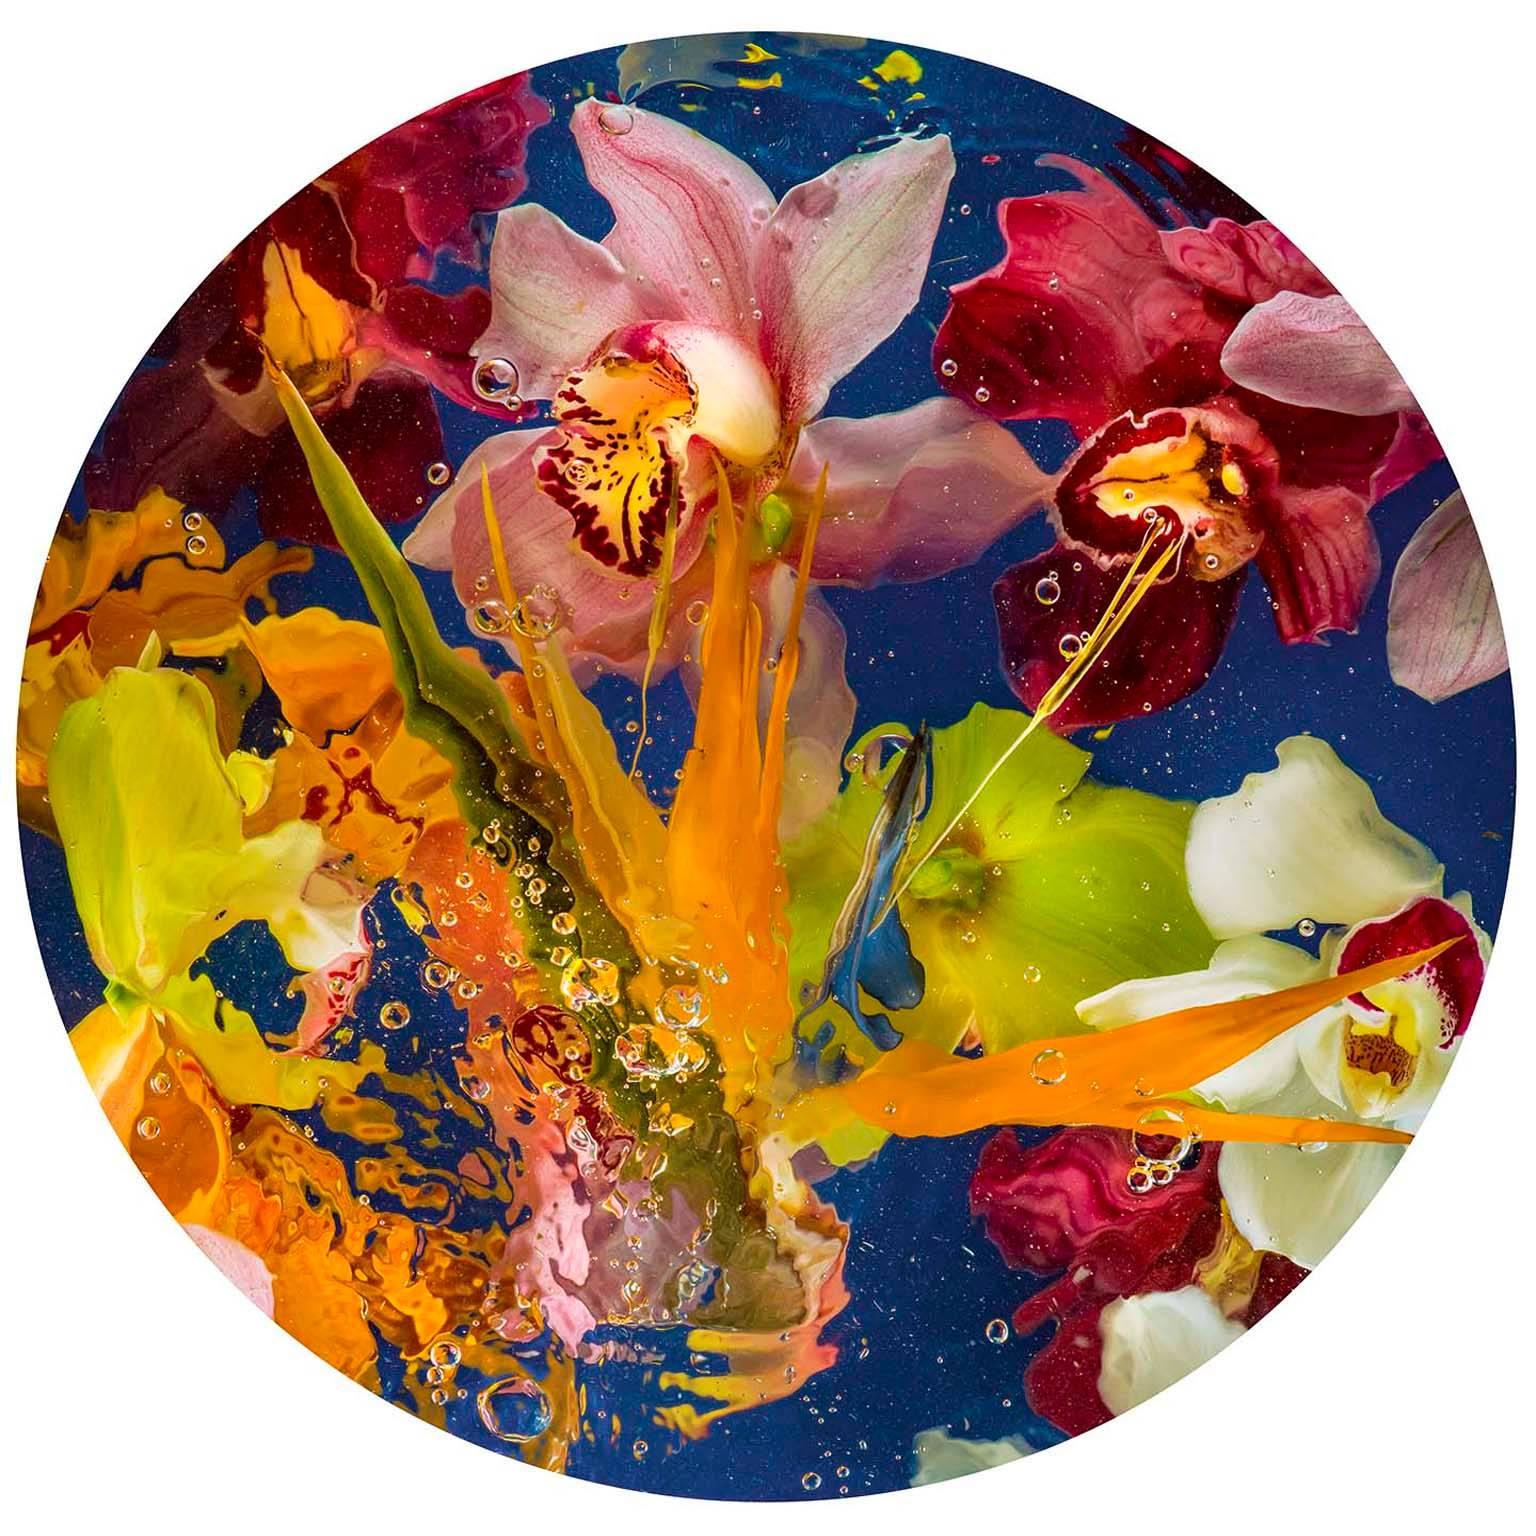 'Aqua Flora No.3' is a limited edition archival metallic c-type photographic print and is diasec mounted featuring beautiful photographed flowers and bubbles. This contemporary piece of photography is signed by the artist himself, Allan Forsyth, and